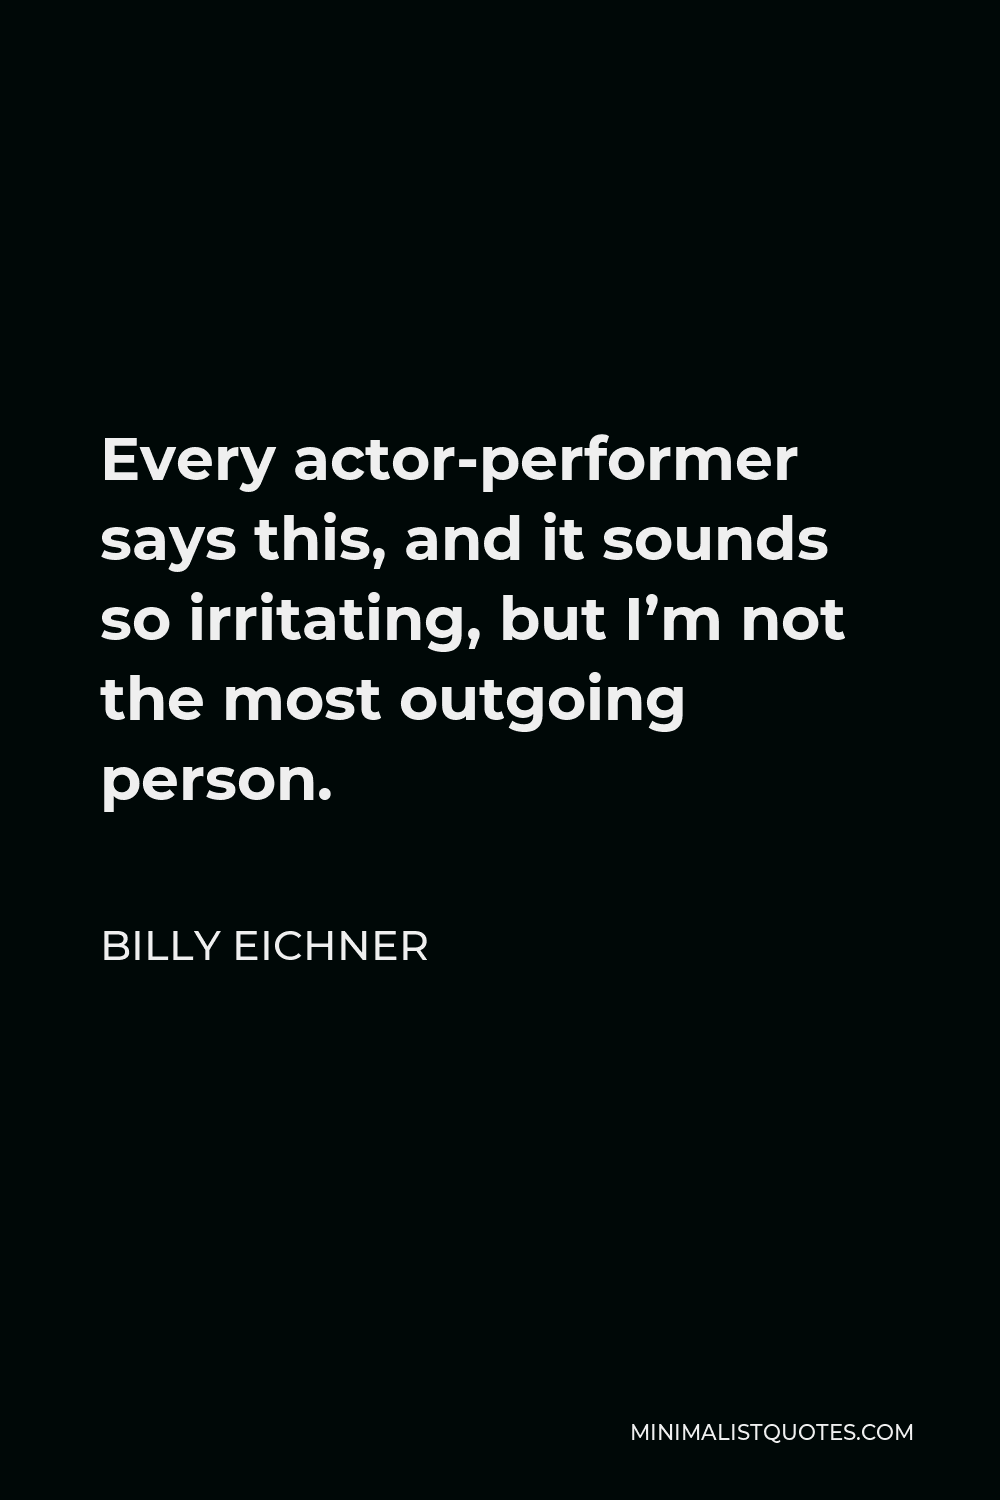 Billy Eichner Quote - Every actor-performer says this, and it sounds so irritating, but I’m not the most outgoing person.